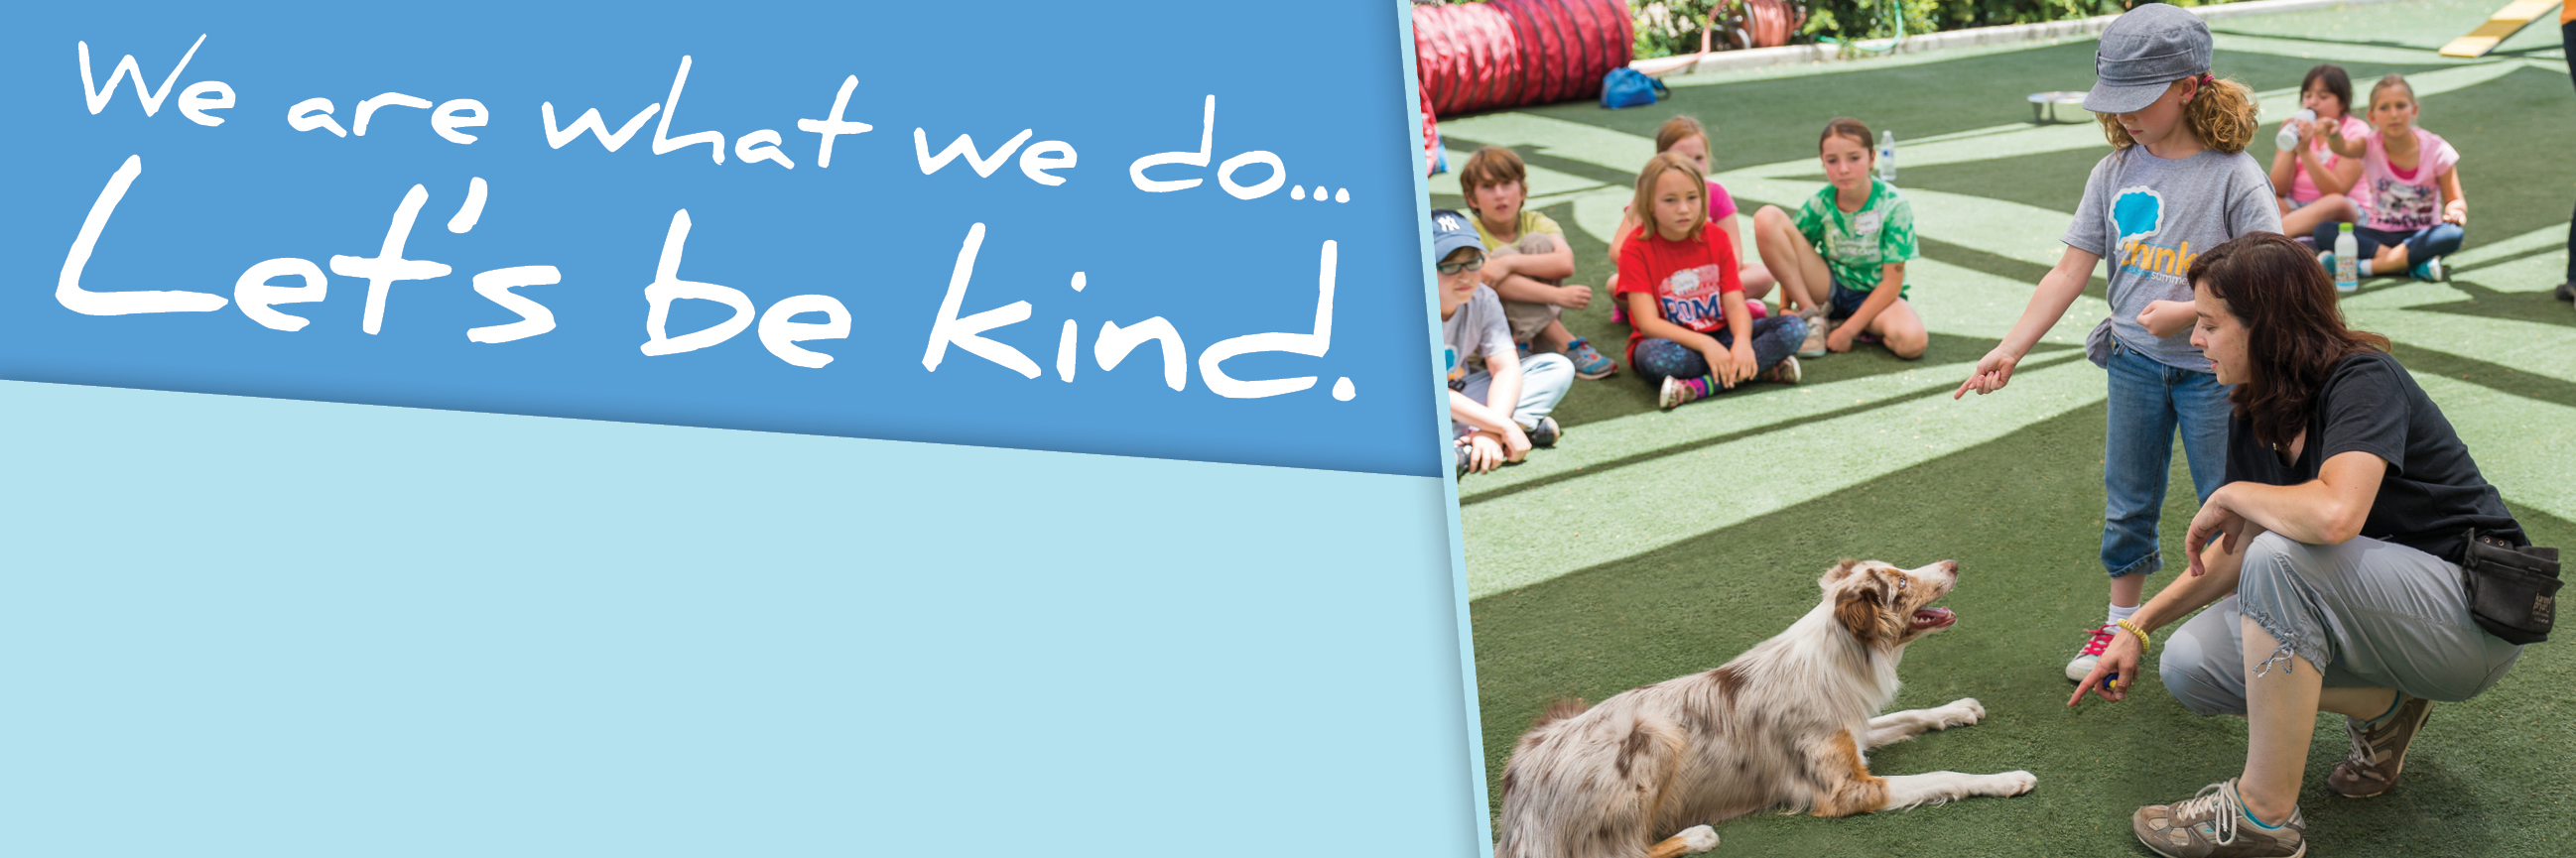 We are what we do…Let’s be kind.